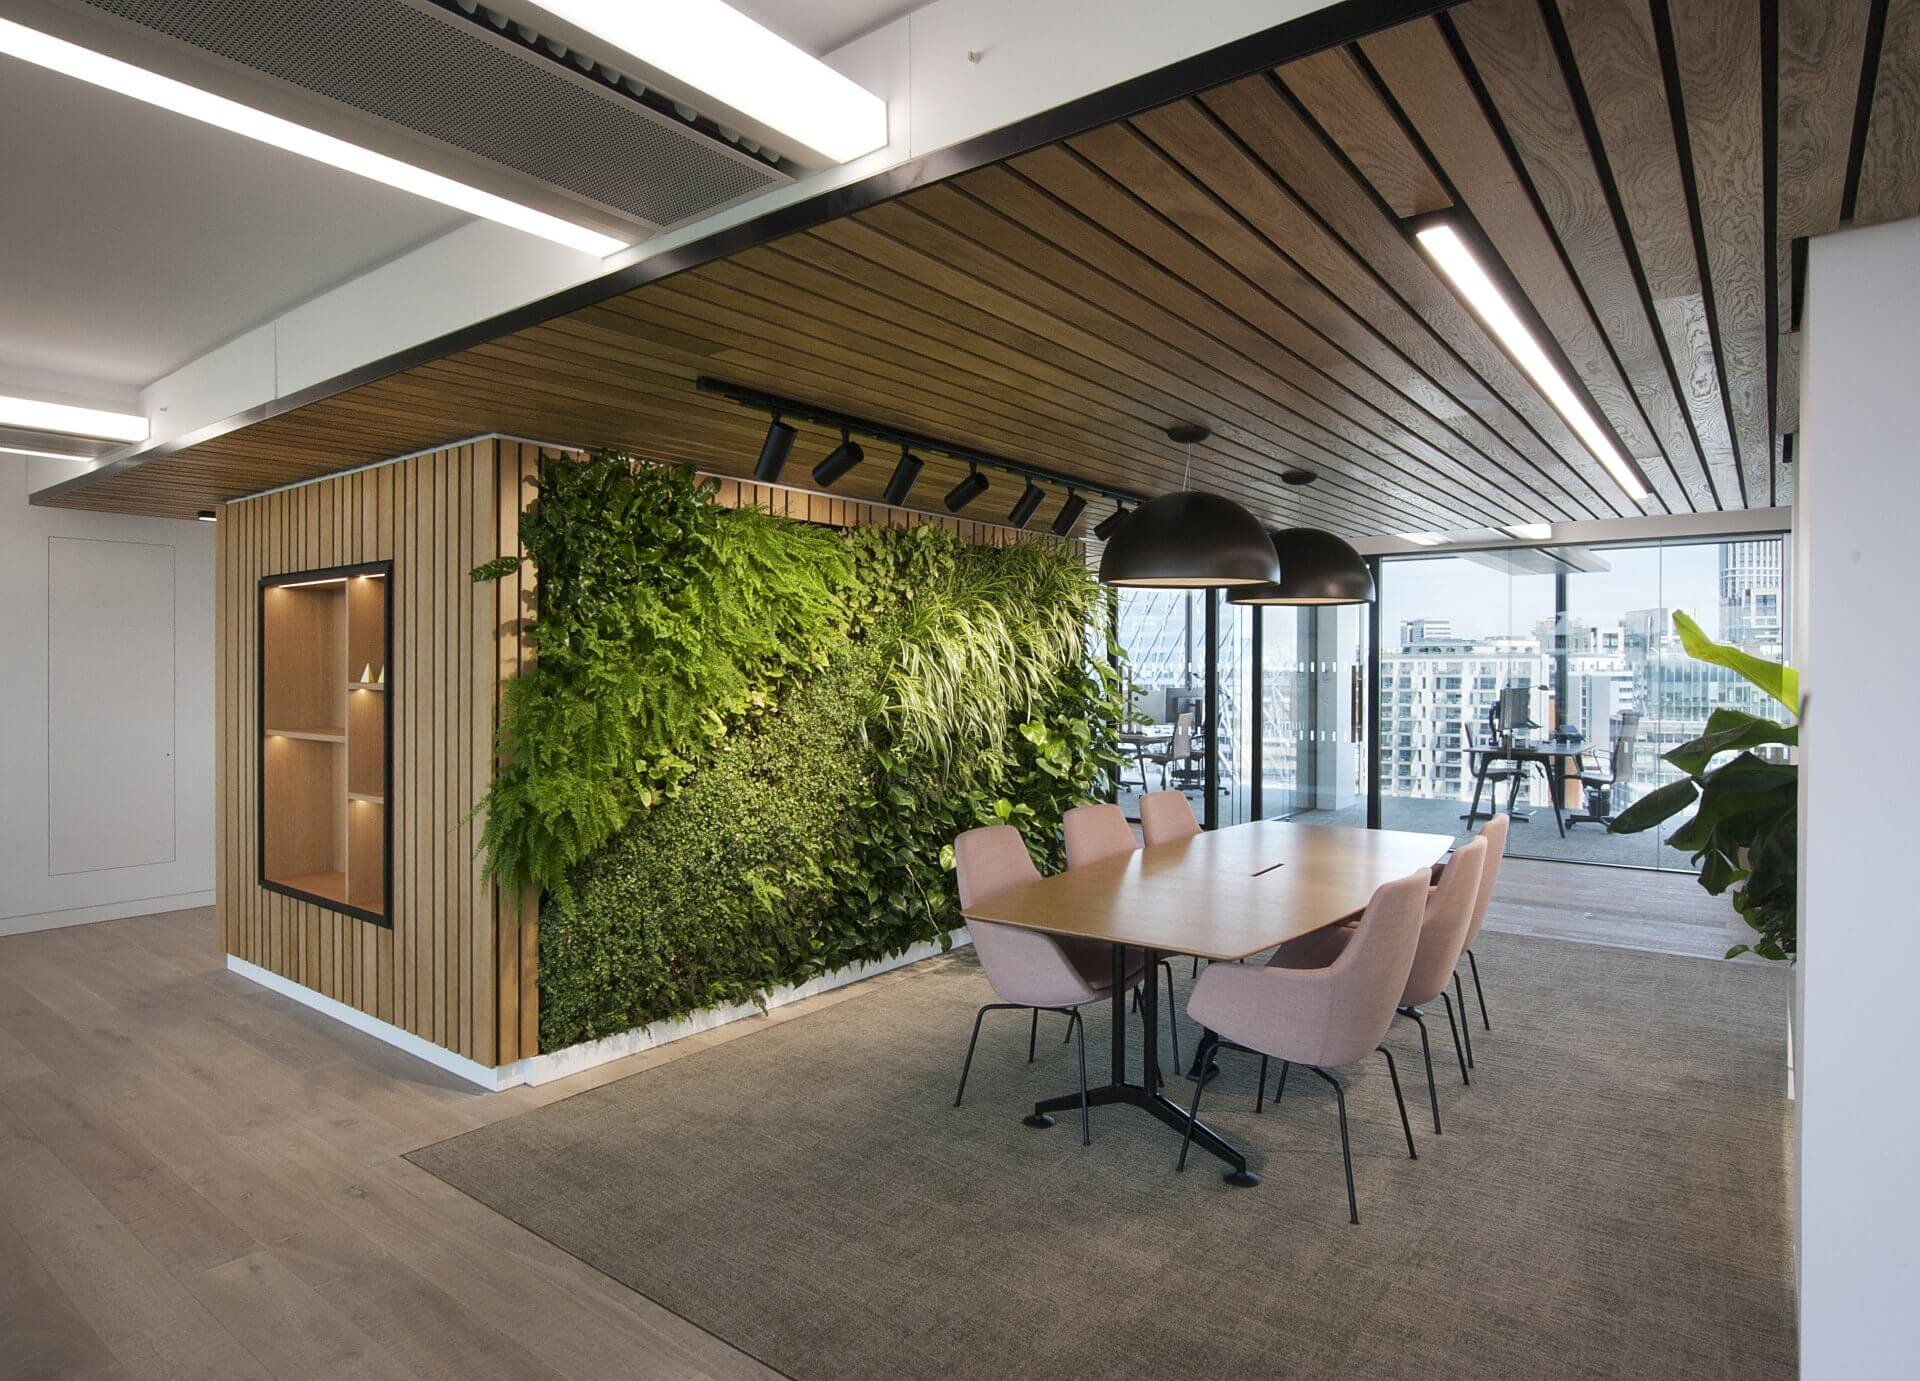 Image of the stunning biophilic design of JAB Holding Company's office, featuring natural elements such as plants, living walls, and high ceilings to create a tranquil and inviting atmosphere for employees.